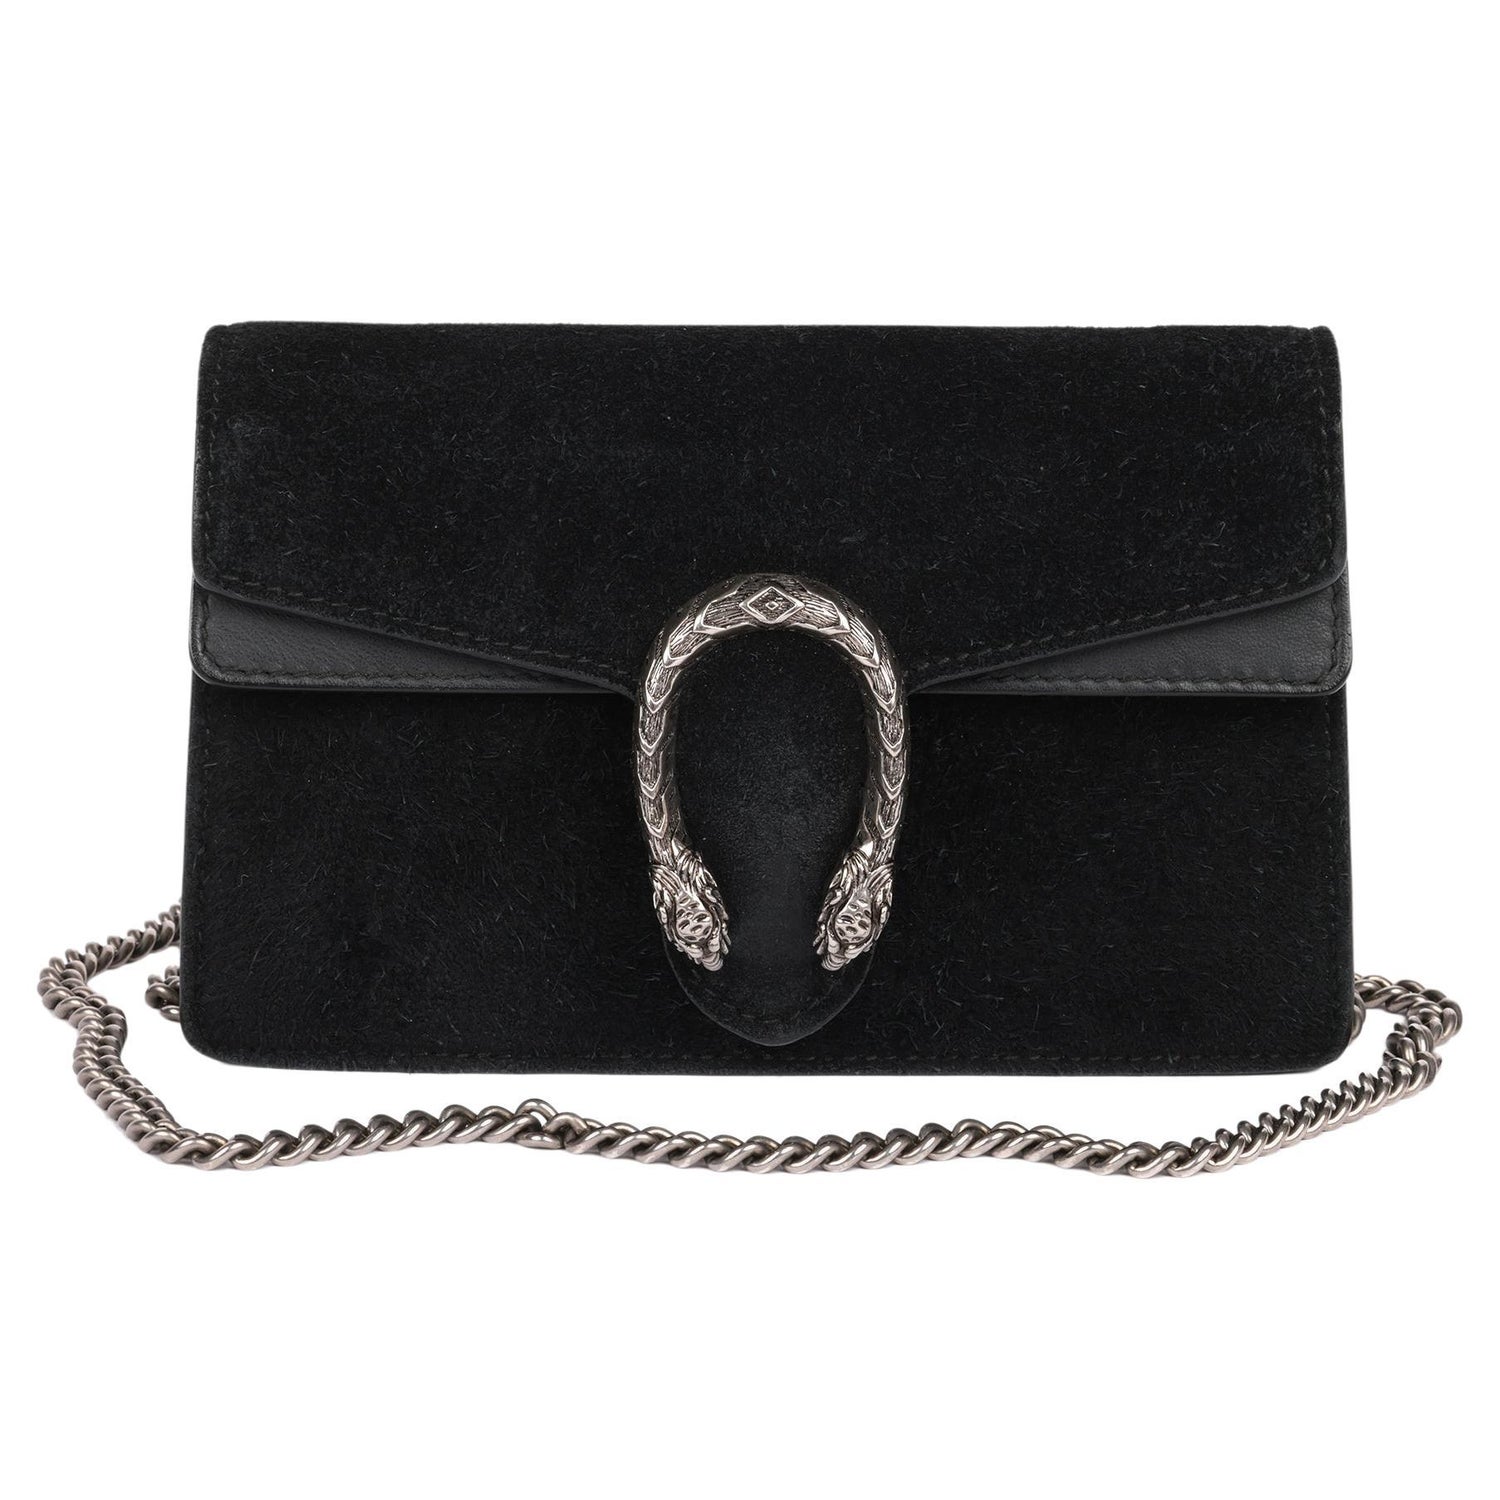 Gucci Black Suede And Strass Medium Dionysus Bag Silver Hardware